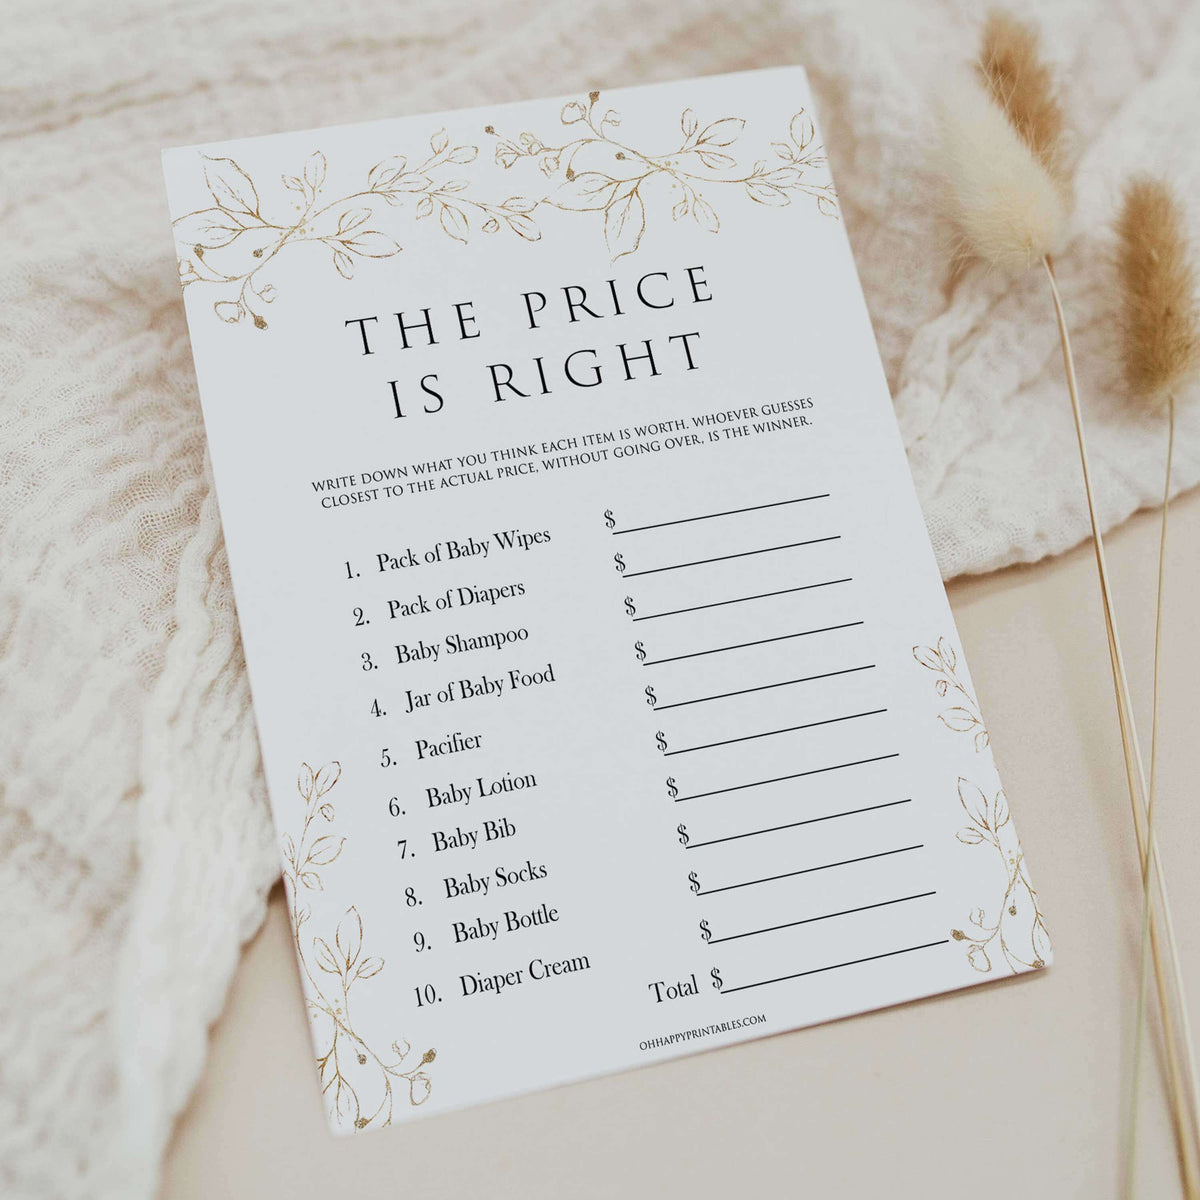 the price is right baby shower games, Printable baby shower games, gold leaf baby games, baby shower games, fun baby shower ideas, top baby shower ideas, gold leaf baby shower, baby shower games, fun gold leaf baby shower ideas